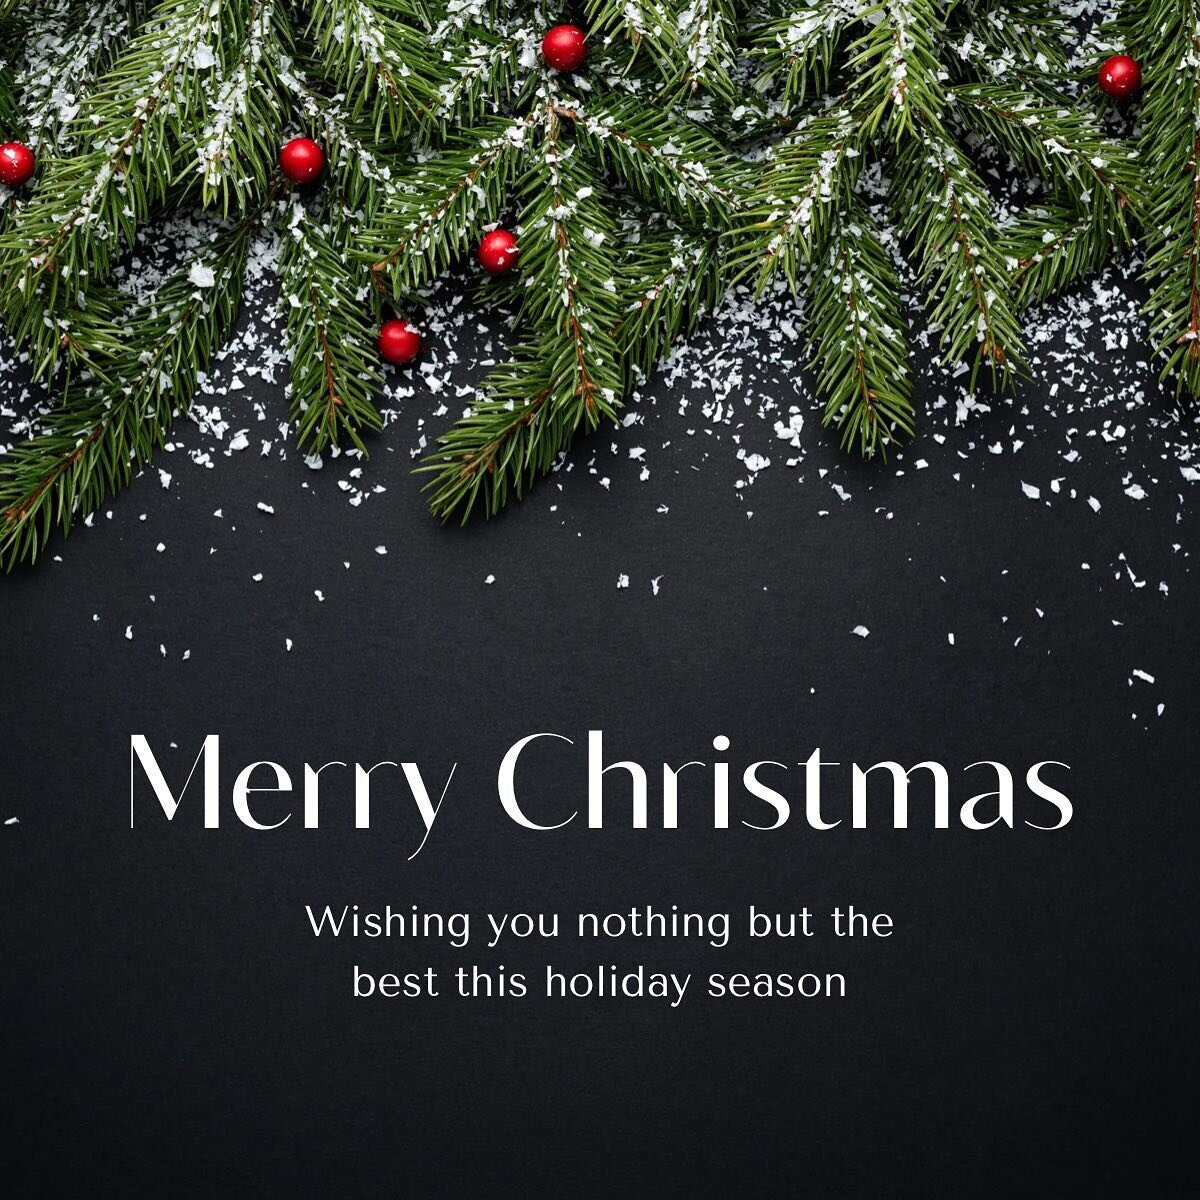 Merry Christmas to all my friends, family and clients!